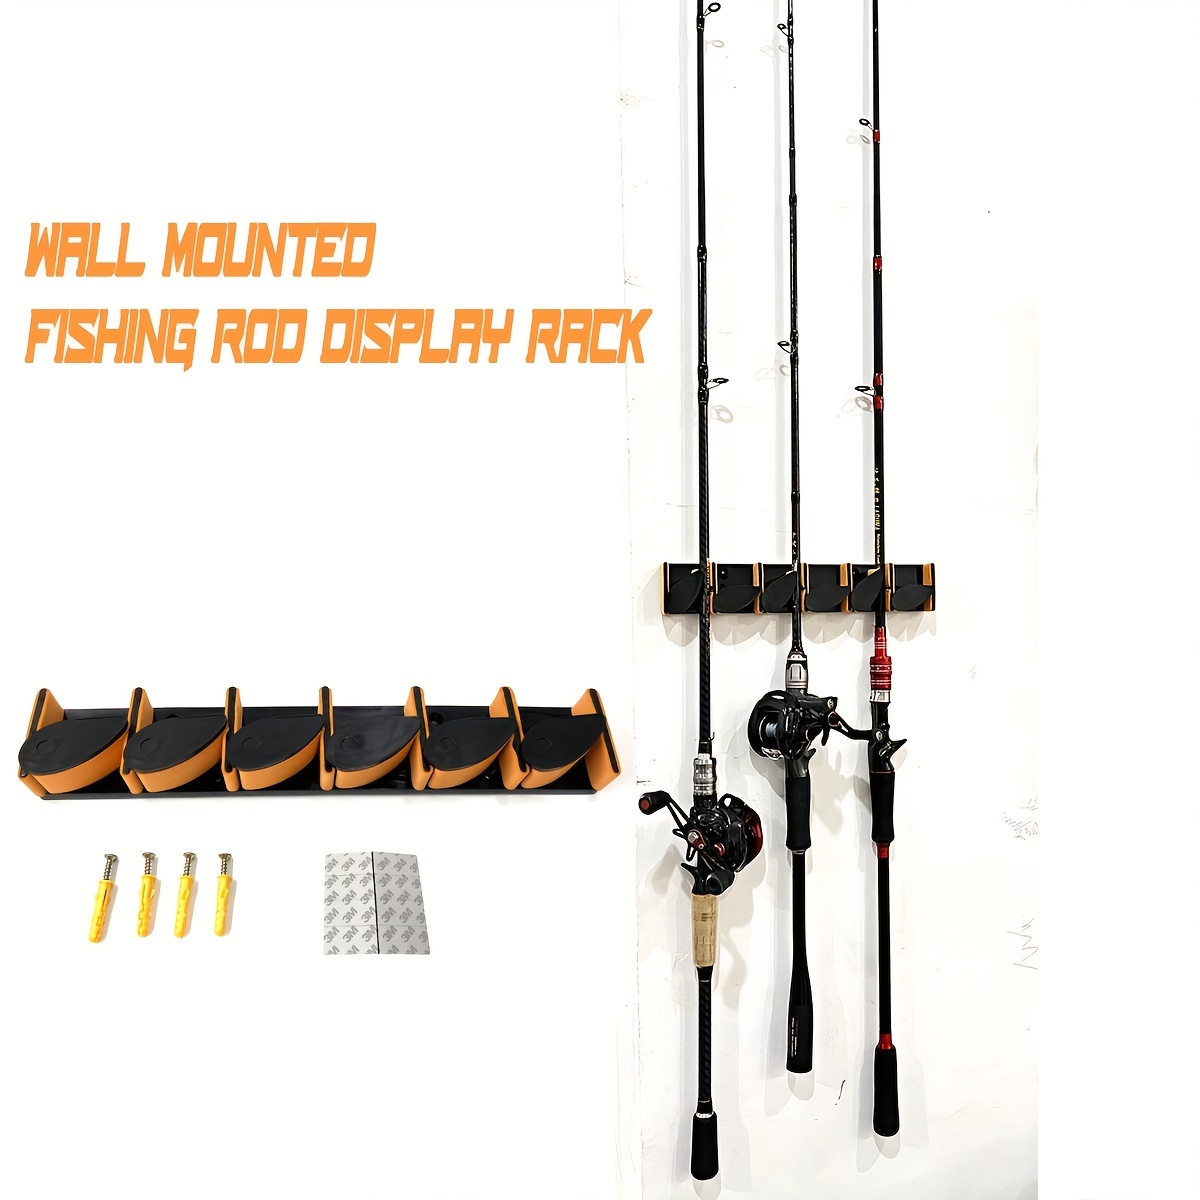 1pc Plastic Fishing Rod Rack For 6 Rods, Wall Mounted Fishing Pole Display  Organized Holder, Fishing Gear